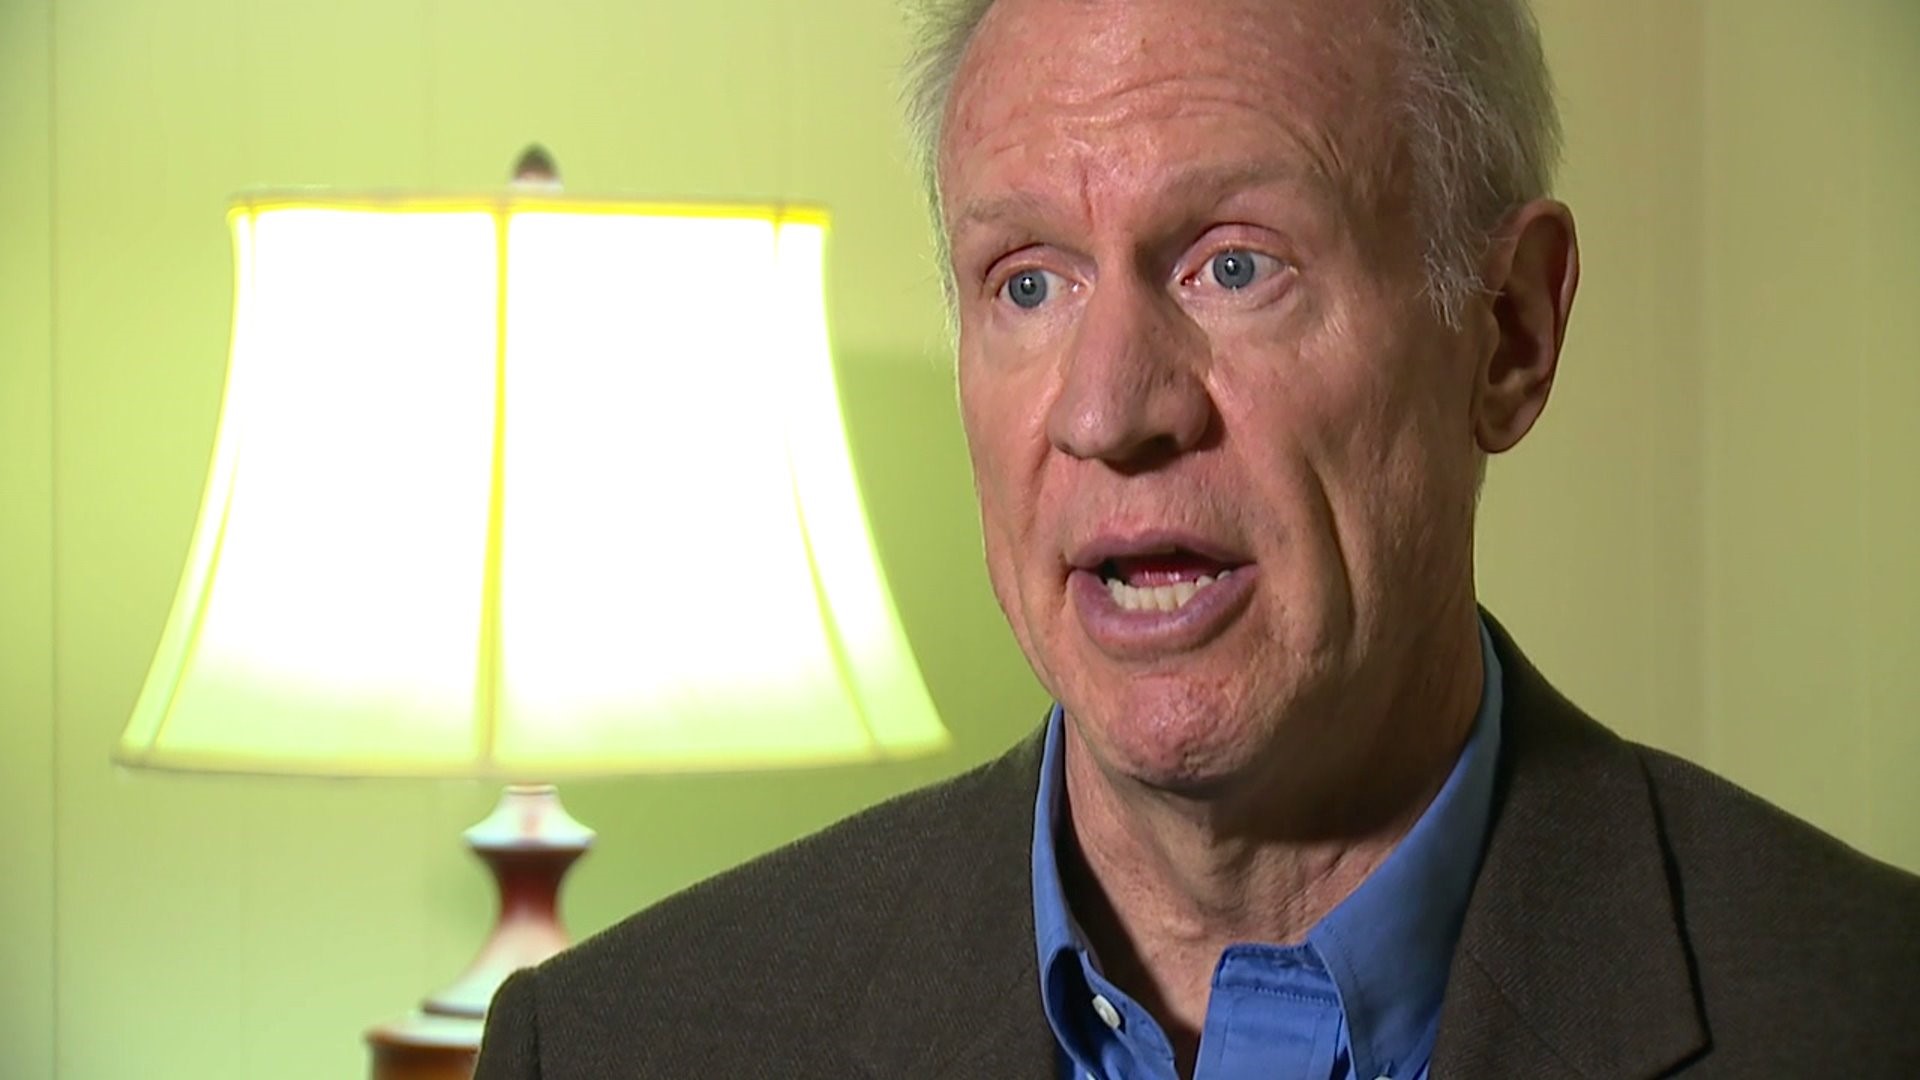 BREAKFAST WITH... Gov. Bruce Rauner on Attack Ads